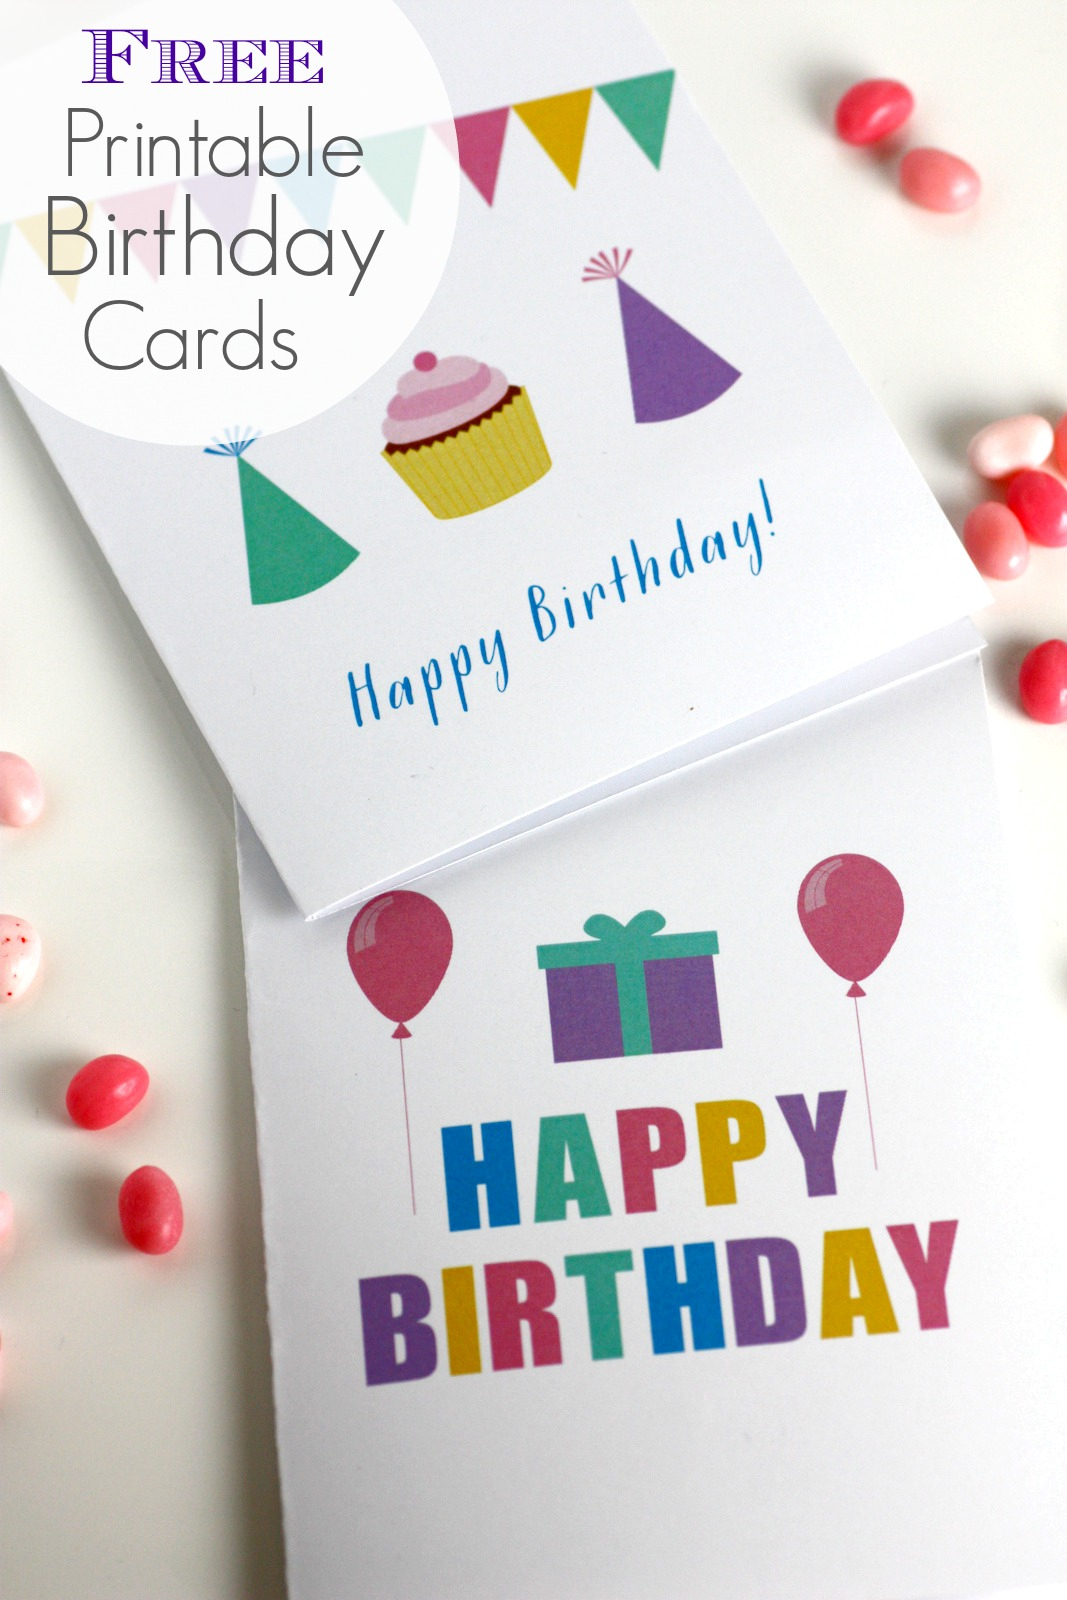 Free Printable Blank Birthday Cards | Catch My Party - Free Printable Greeting Cards